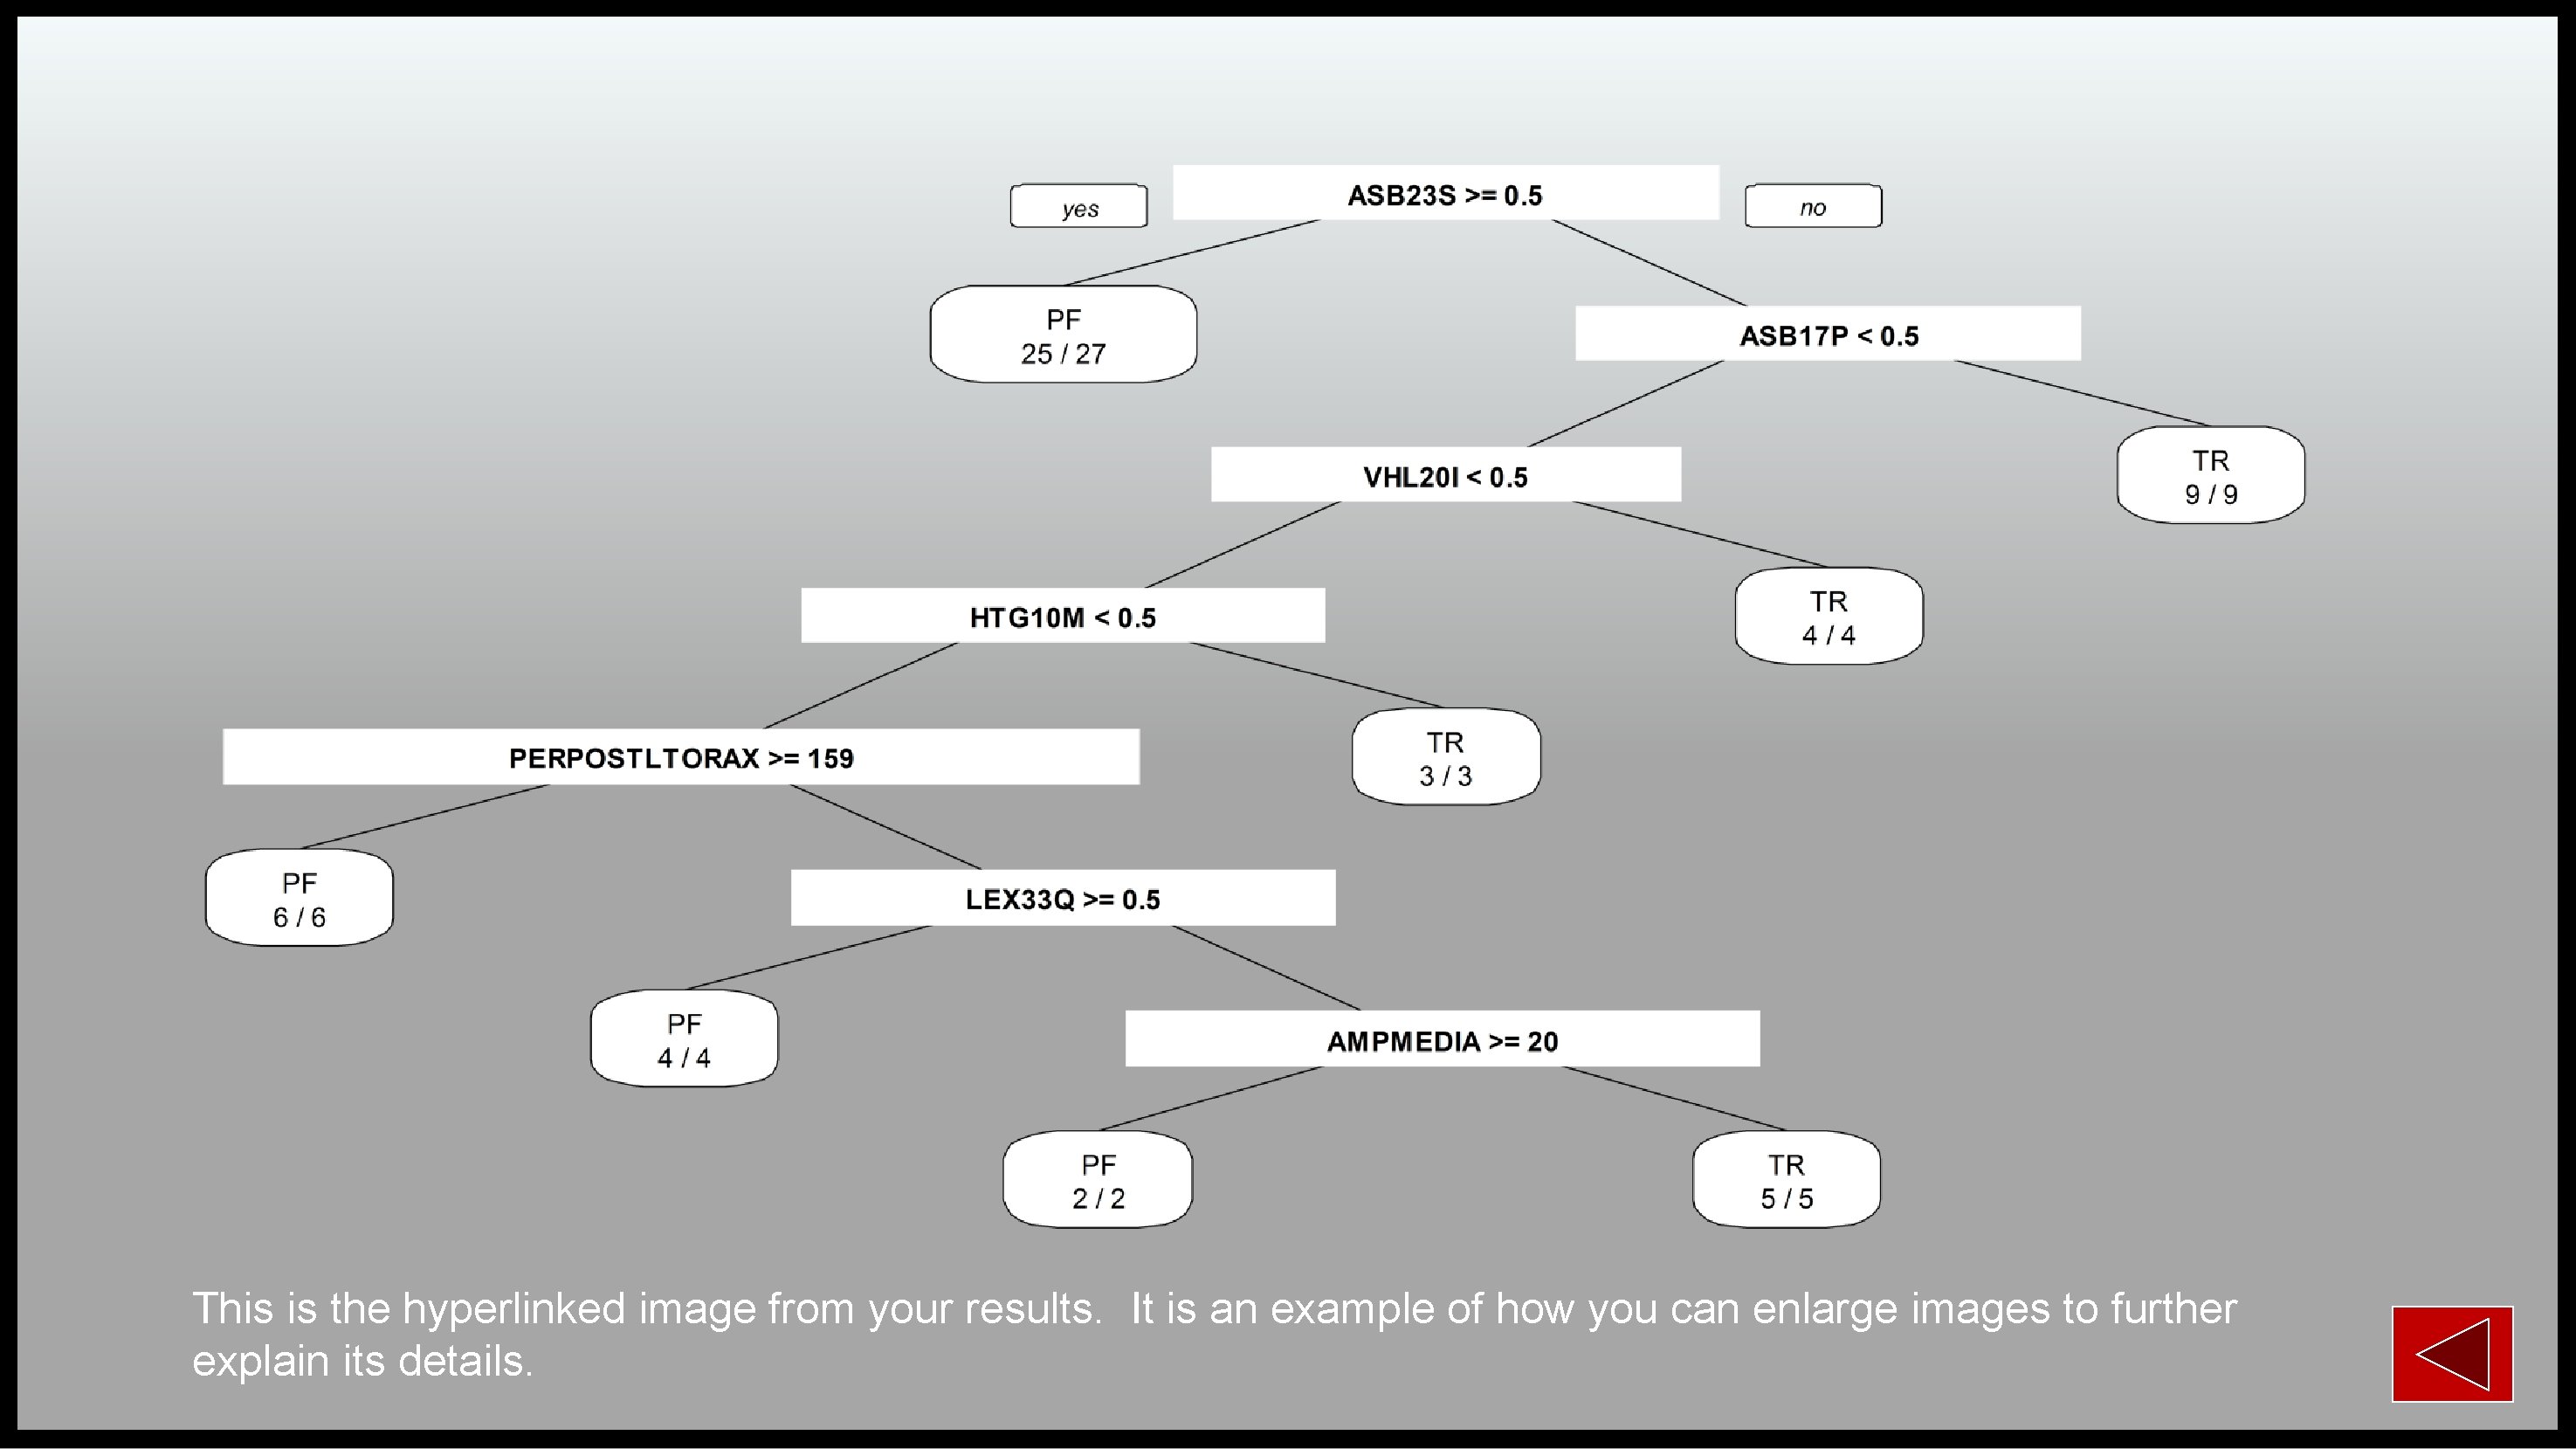 This is the hyperlinked image from your results. It is an example of how